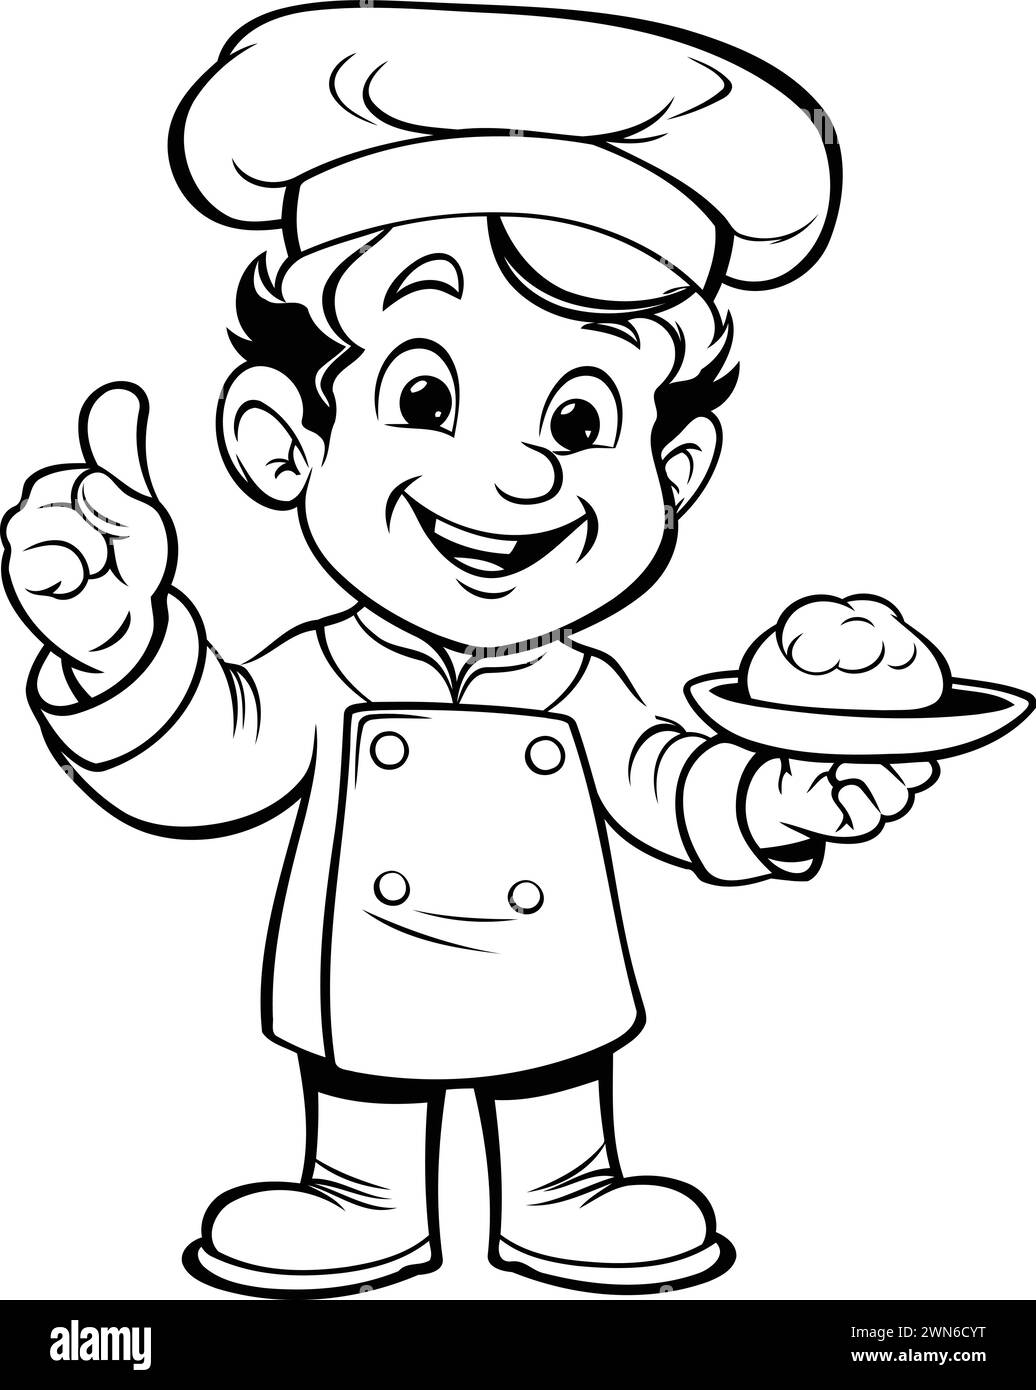 Black and White Cartoon Illustration of a Little Boy Chef Character with a Plate for Coloring Book Stock Vector